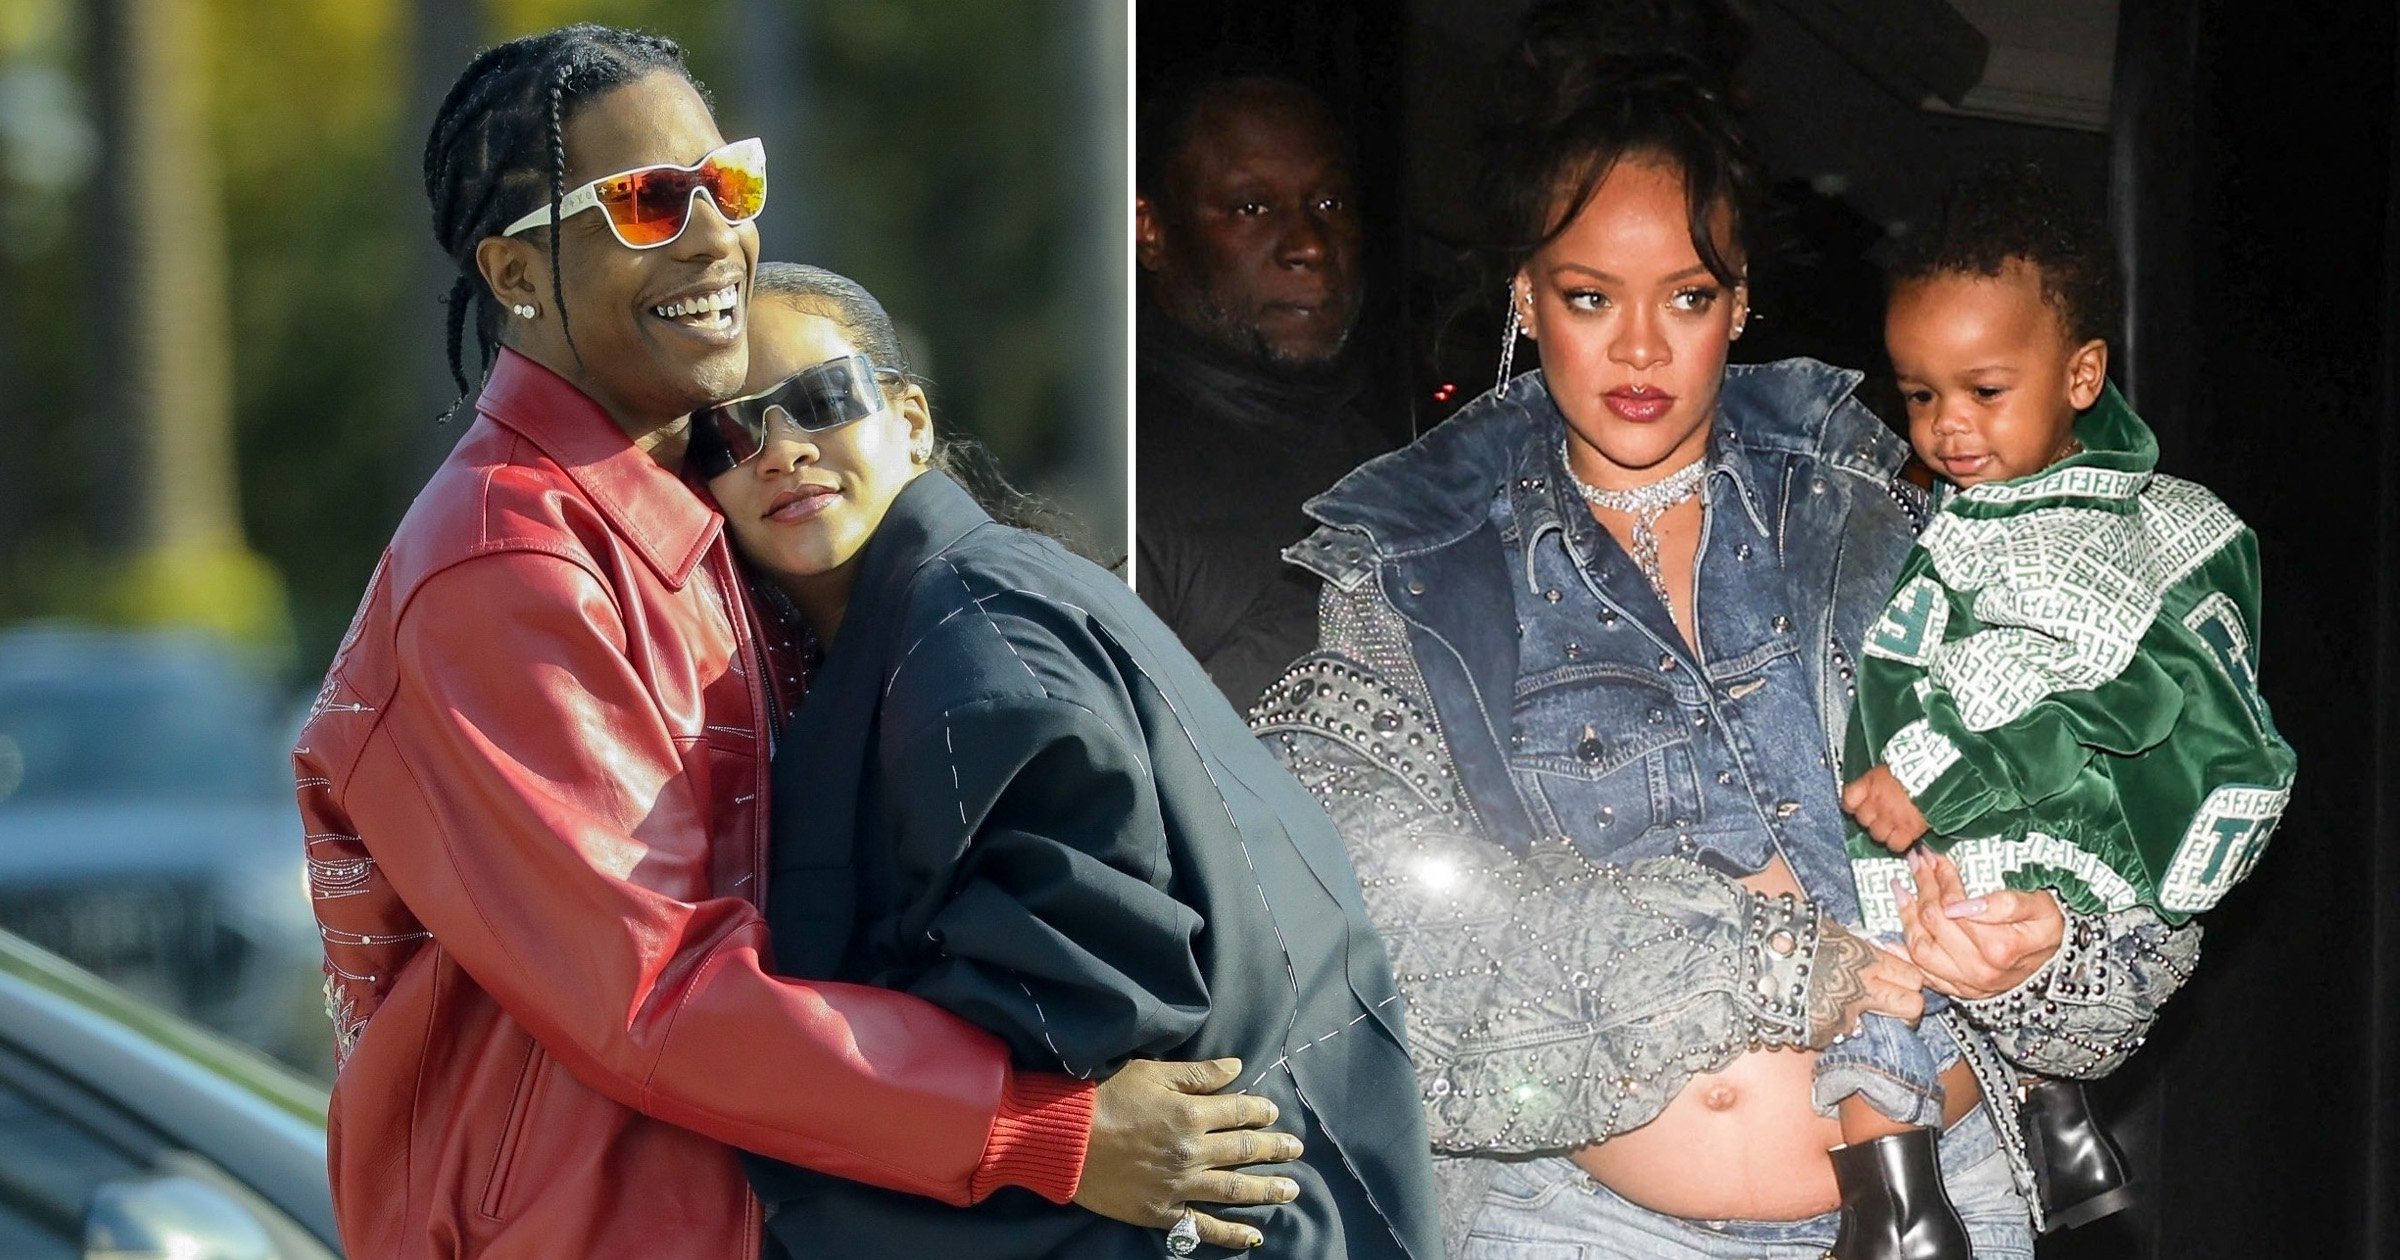 Rihanna and A$AP Rocky snapped in sweet embrace after baby son’s Wu-Tang Clan-inspired name finally revealed